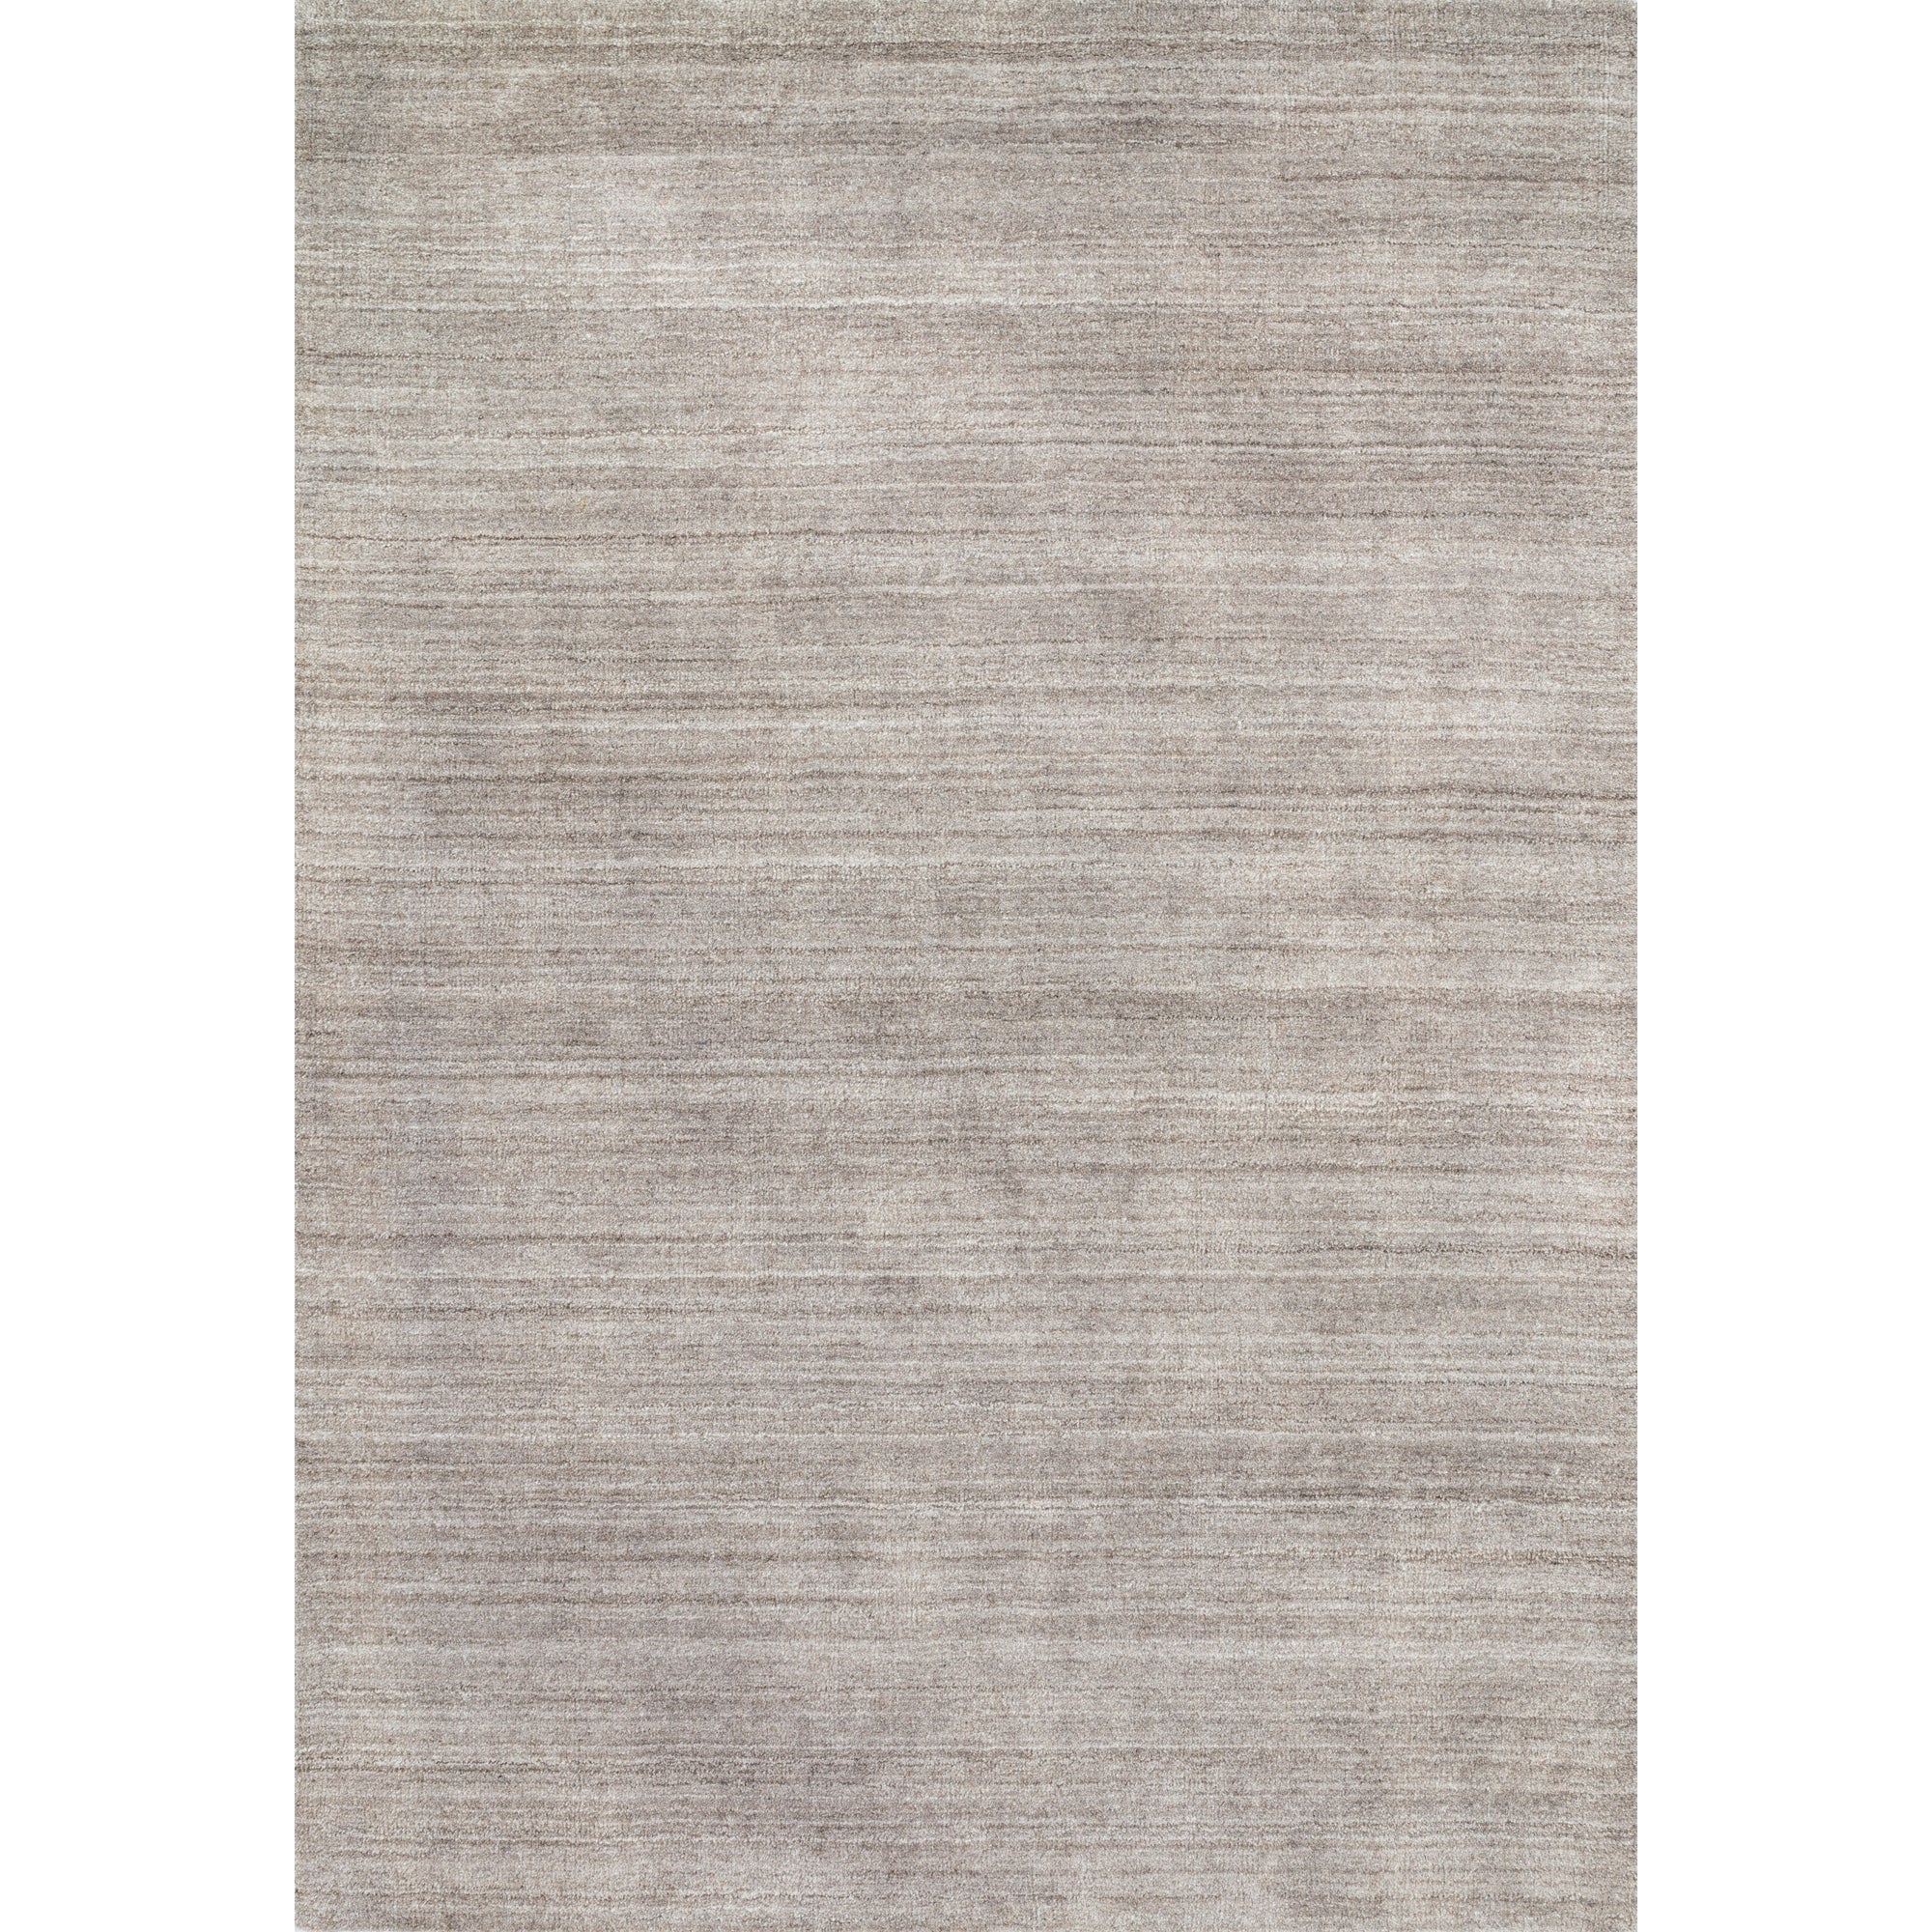 Rugs by Roo Loloi Barkley Mocha Area Rug in size 3' 6" x 5' 6"